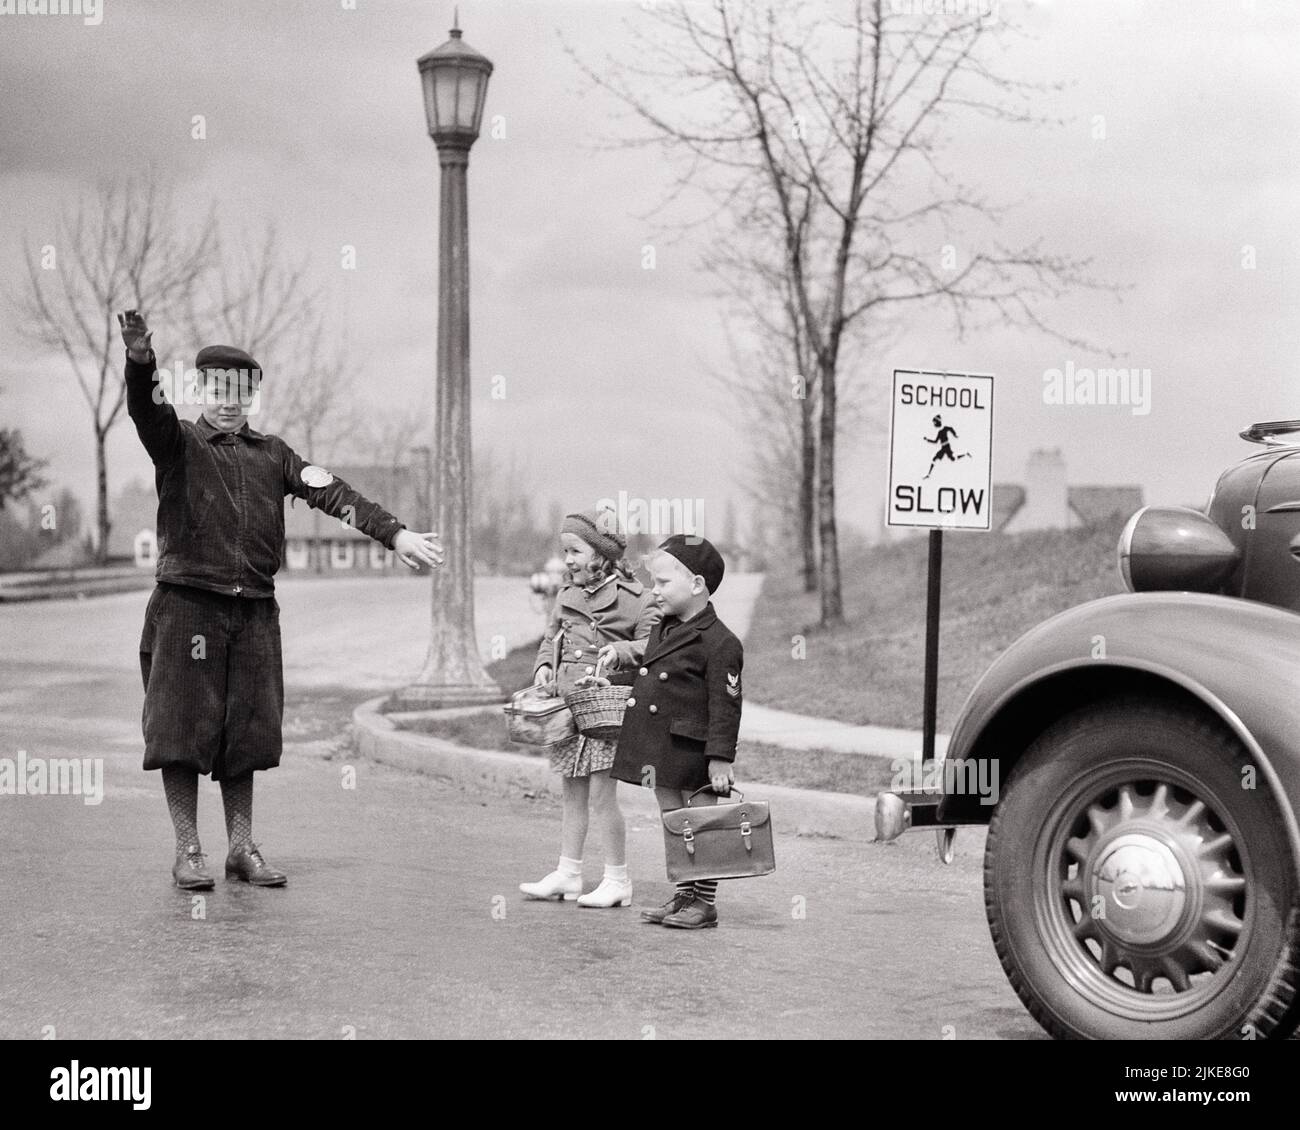 1930s TEEN BOY CROSSING GUARD STOPPING TRAFFIC YOUNG BOY GIRL CARRYING LUNCH PAILS BOOK BAG CROSSING STREET BY SLOW SCHOOL SIGN - j8157 HAR001 HARS BUSY NOSTALGIA BROTHER GUARD CROSSING OLD FASHION AUTO SISTER 1 JUVENILE ELEMENTARY STYLE VEHICLE SAFETY TEAMWORK LIFESTYLE SATISFACTION FEMALES BROTHERS HOME LIFE NATURE COPY SPACE FULL-LENGTH AUTOMOBILE CARING MALES RISK TEENAGE BOY SIBLINGS SISTERS TRANSPORTATION B&W SCHOOLS GRADE PROTECTION AUTOS LEADERSHIP FALL SEASON PAILS PRIDE PRIMARY SIBLING CONNECTION PATROL CONCEPTUAL AUTOMOBILES STOPPING VEHICLES CROSSING GUARD COOPERATION GRADE SCHOOL Stock Photo